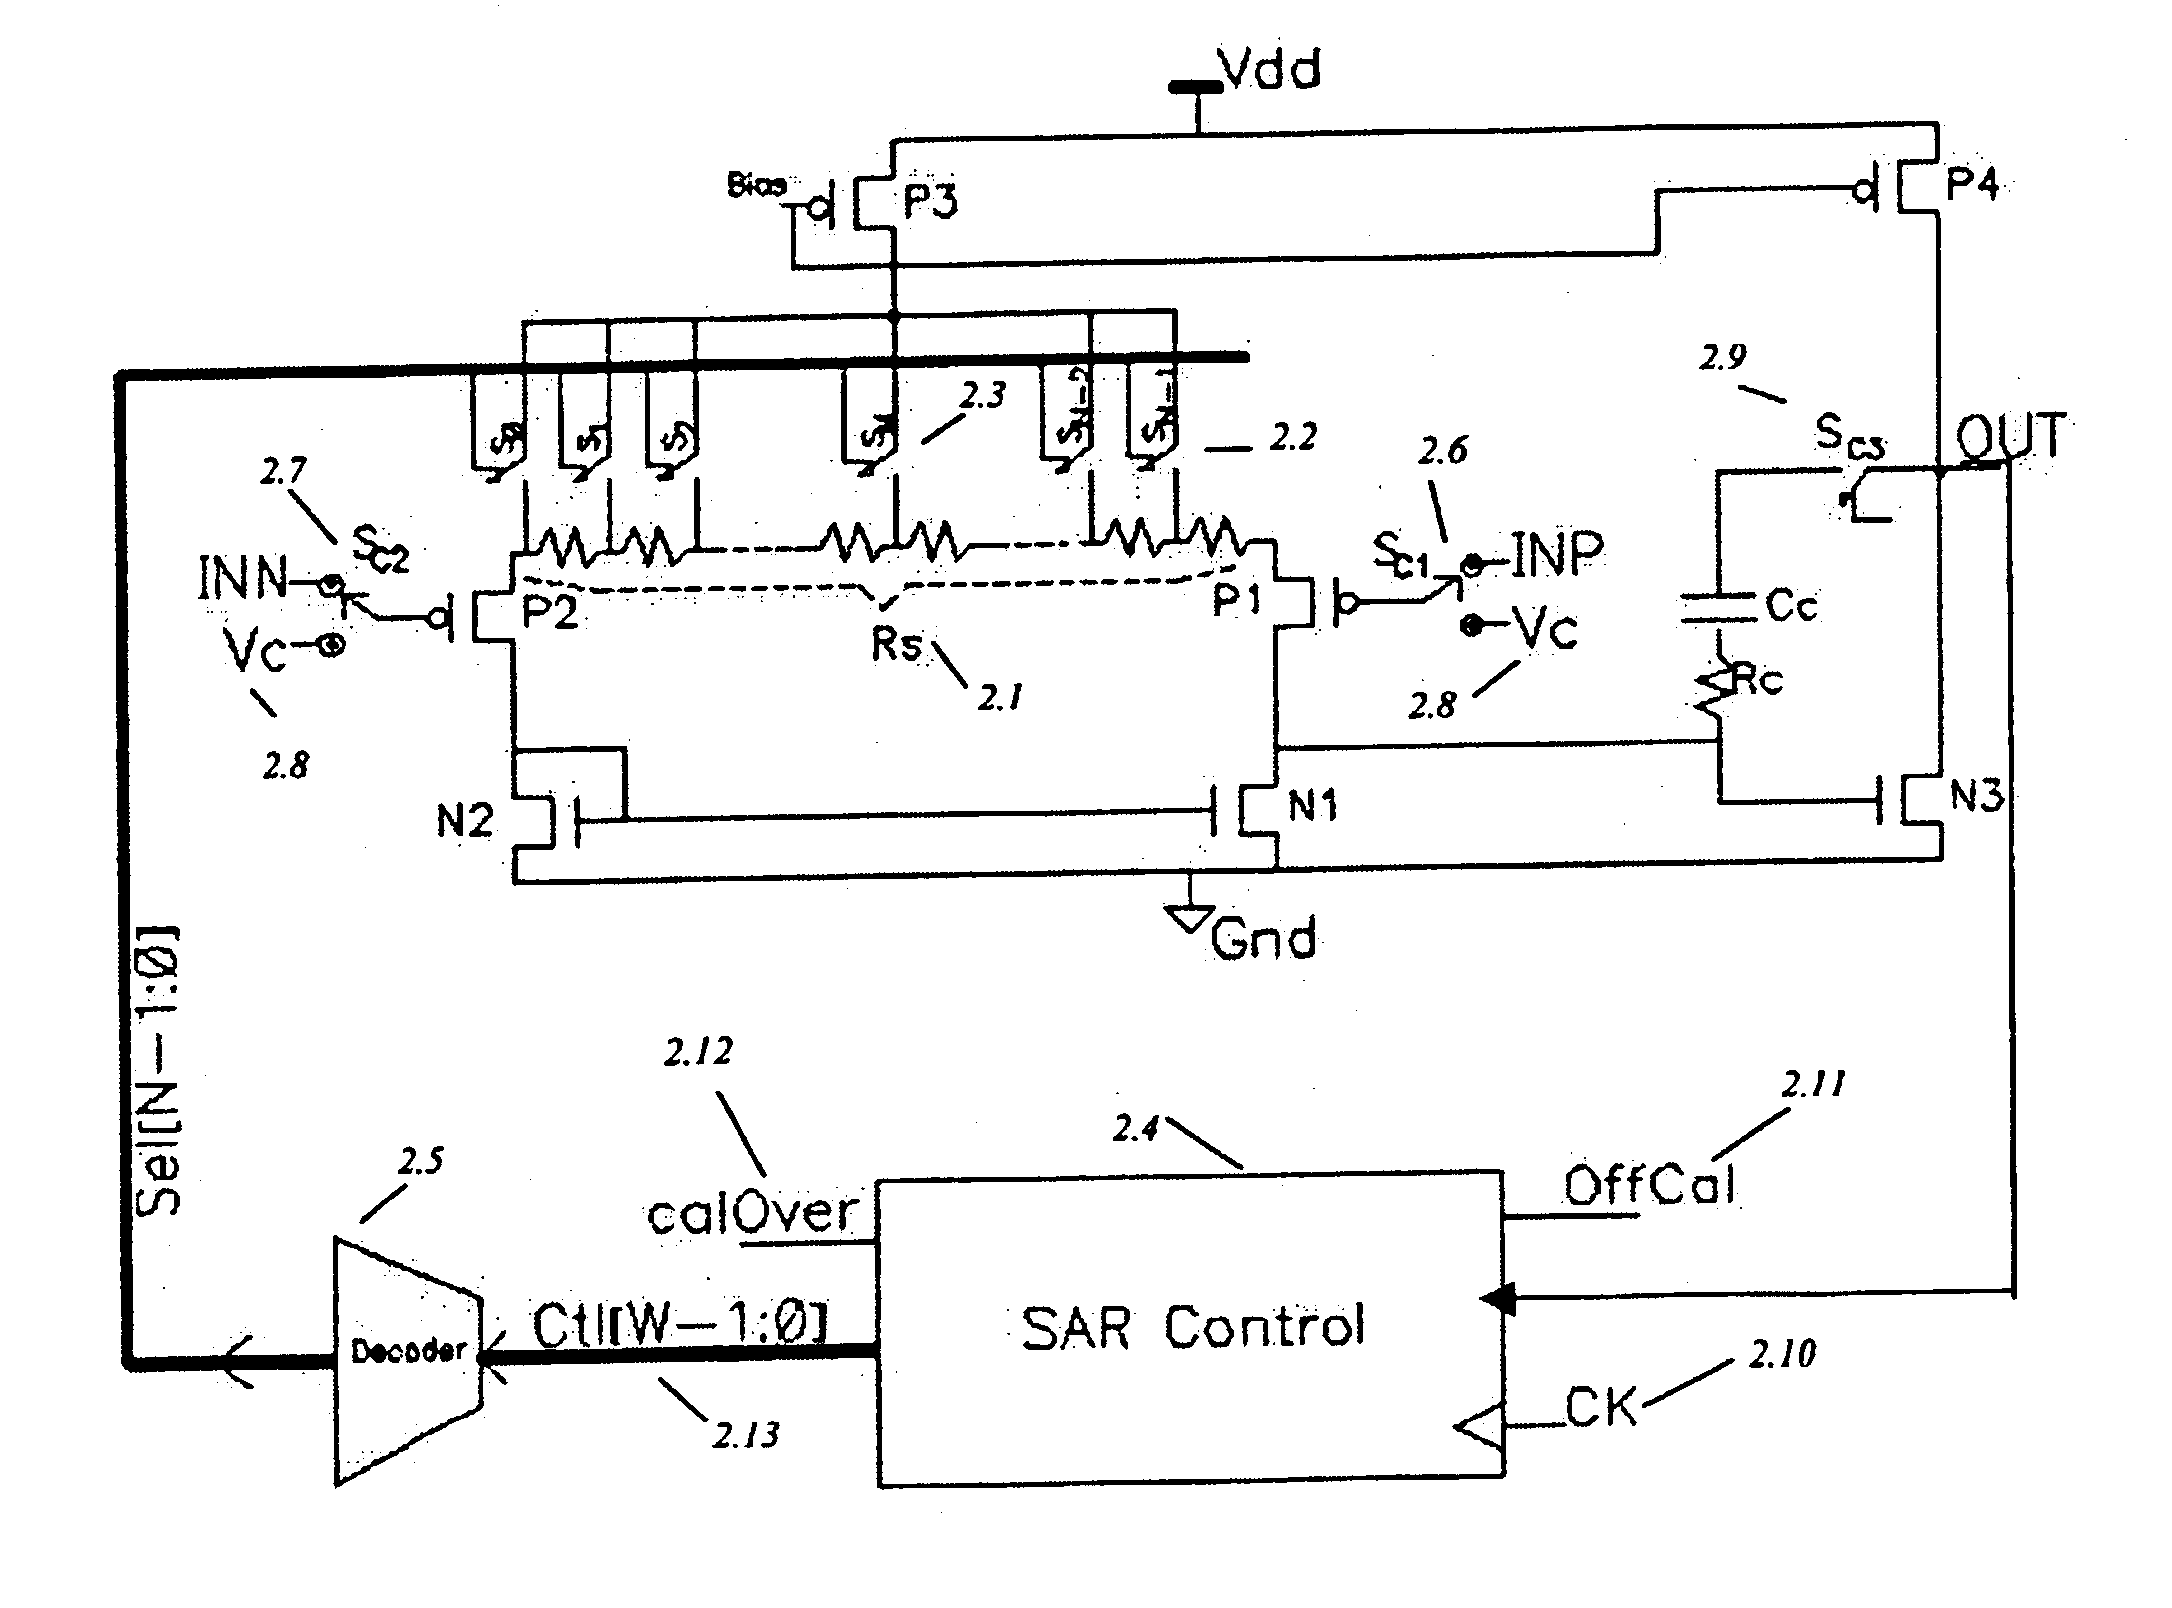 Non-switched capacitor offset voltage compensation in operational amplifiers